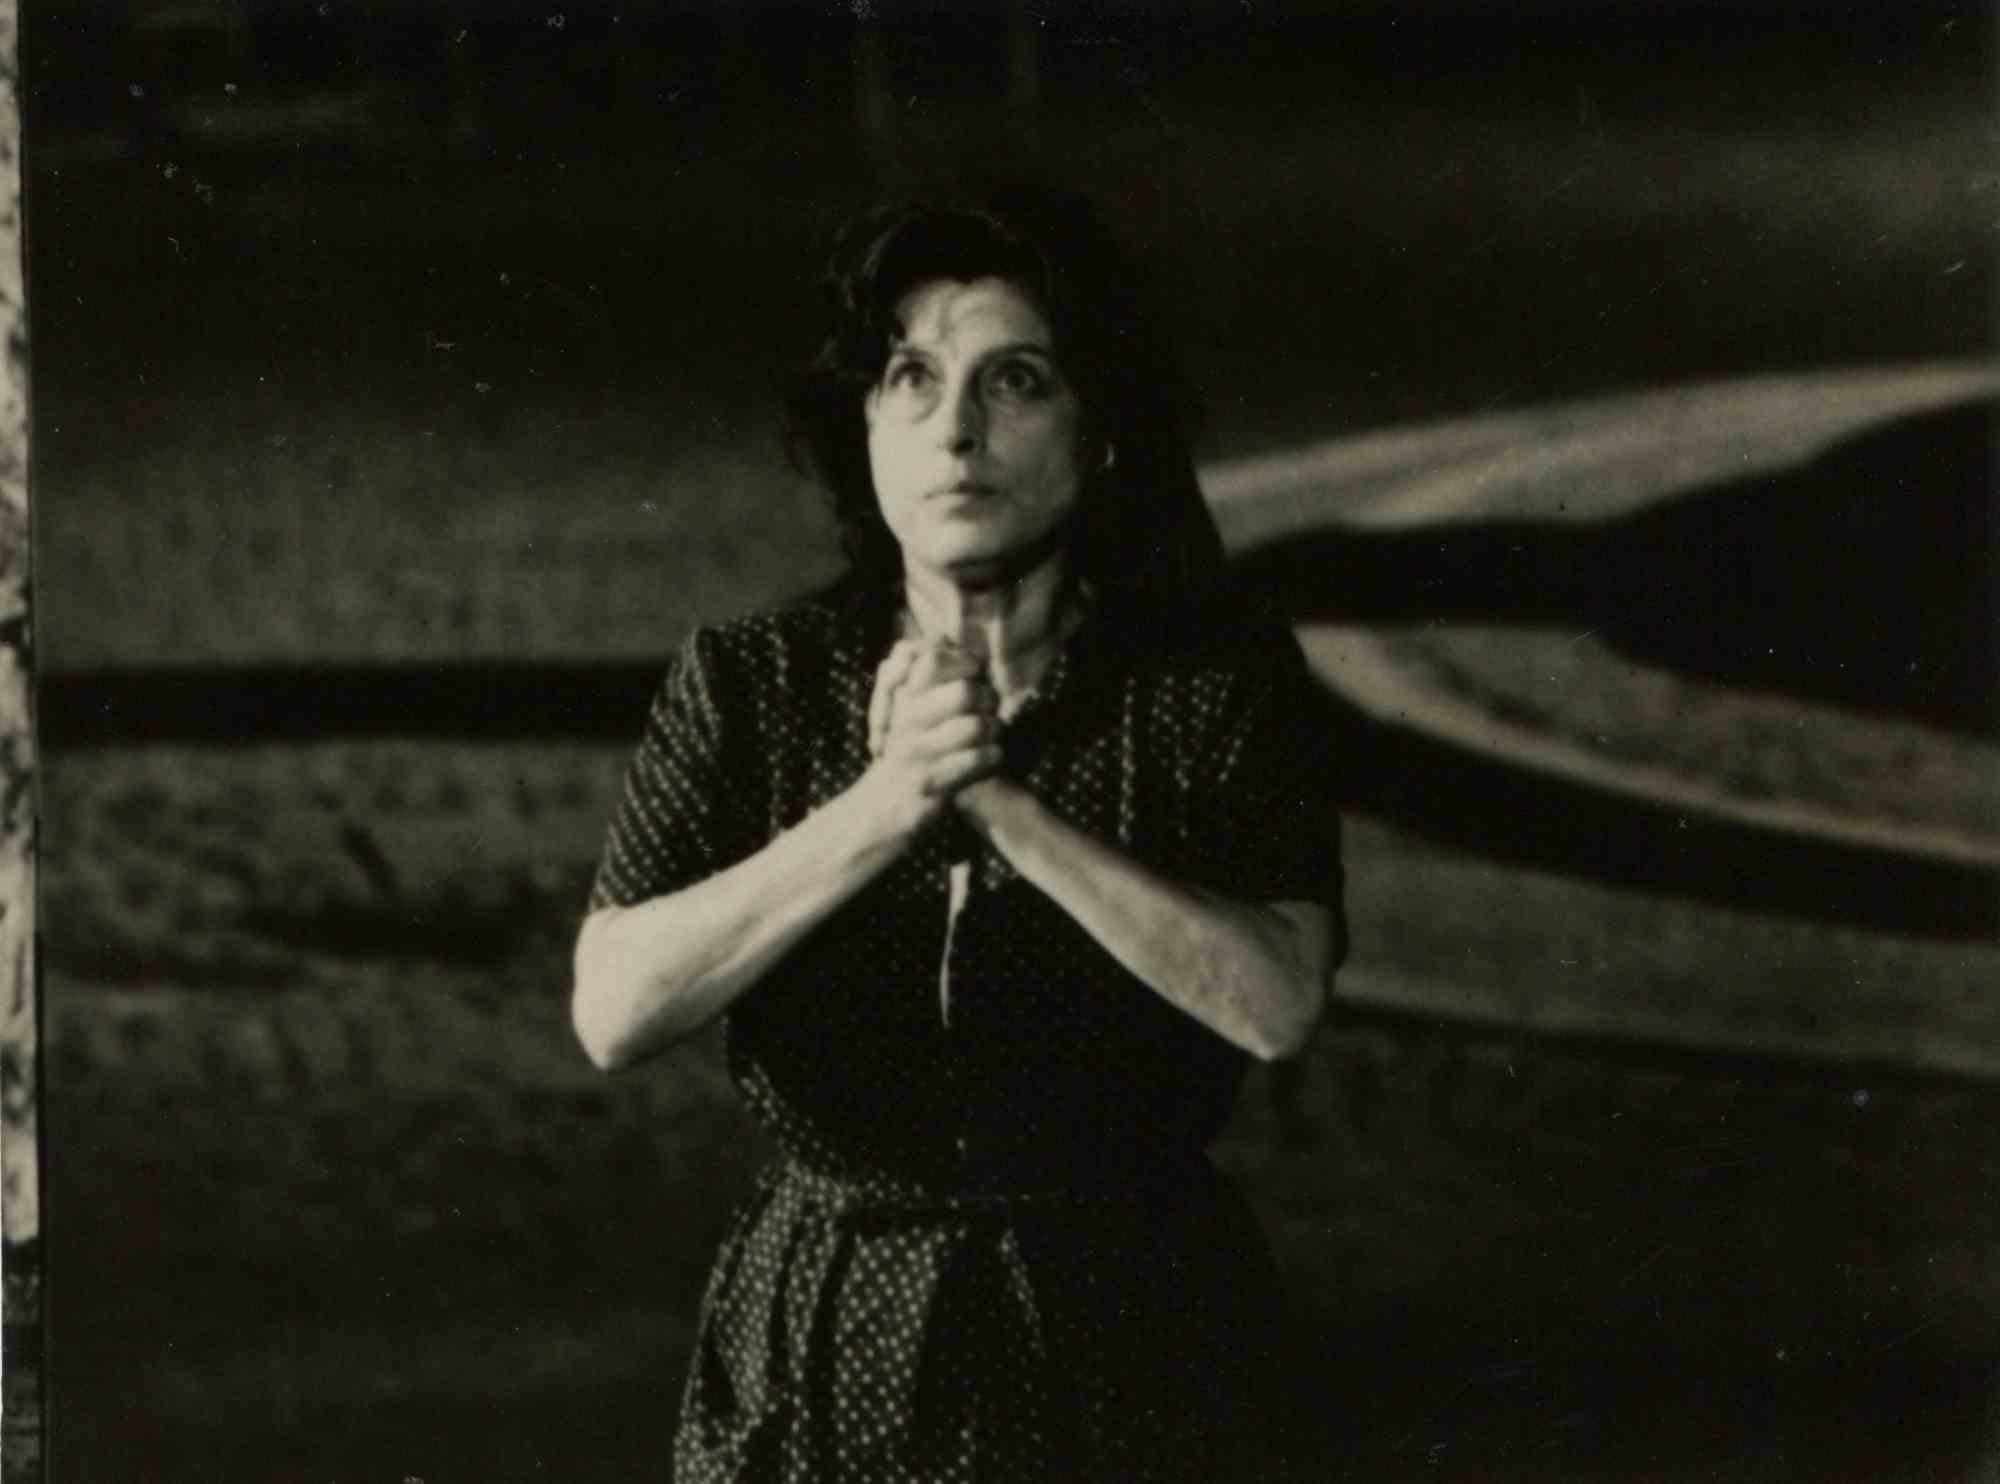 Unknown Black and White Photograph - Portrait of Anna Magnani in "Mamma Roma" - Vintage B/W photo - Mid 20th Century